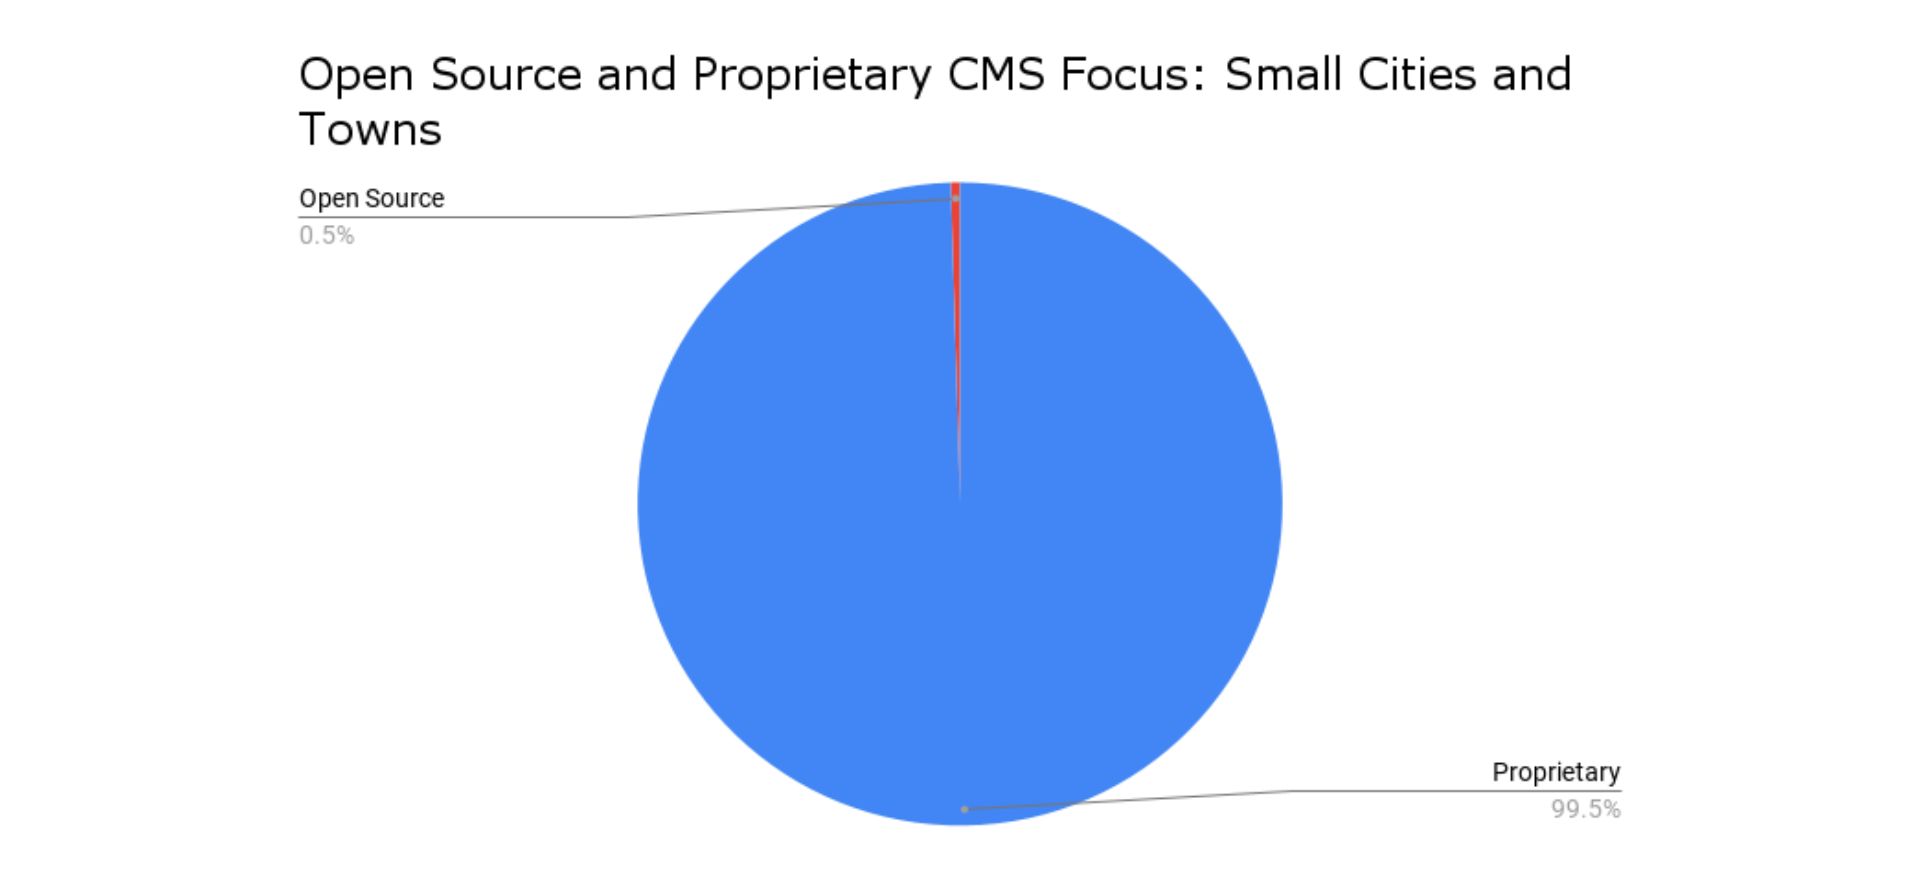 open source and proprietary cms focus: small cities